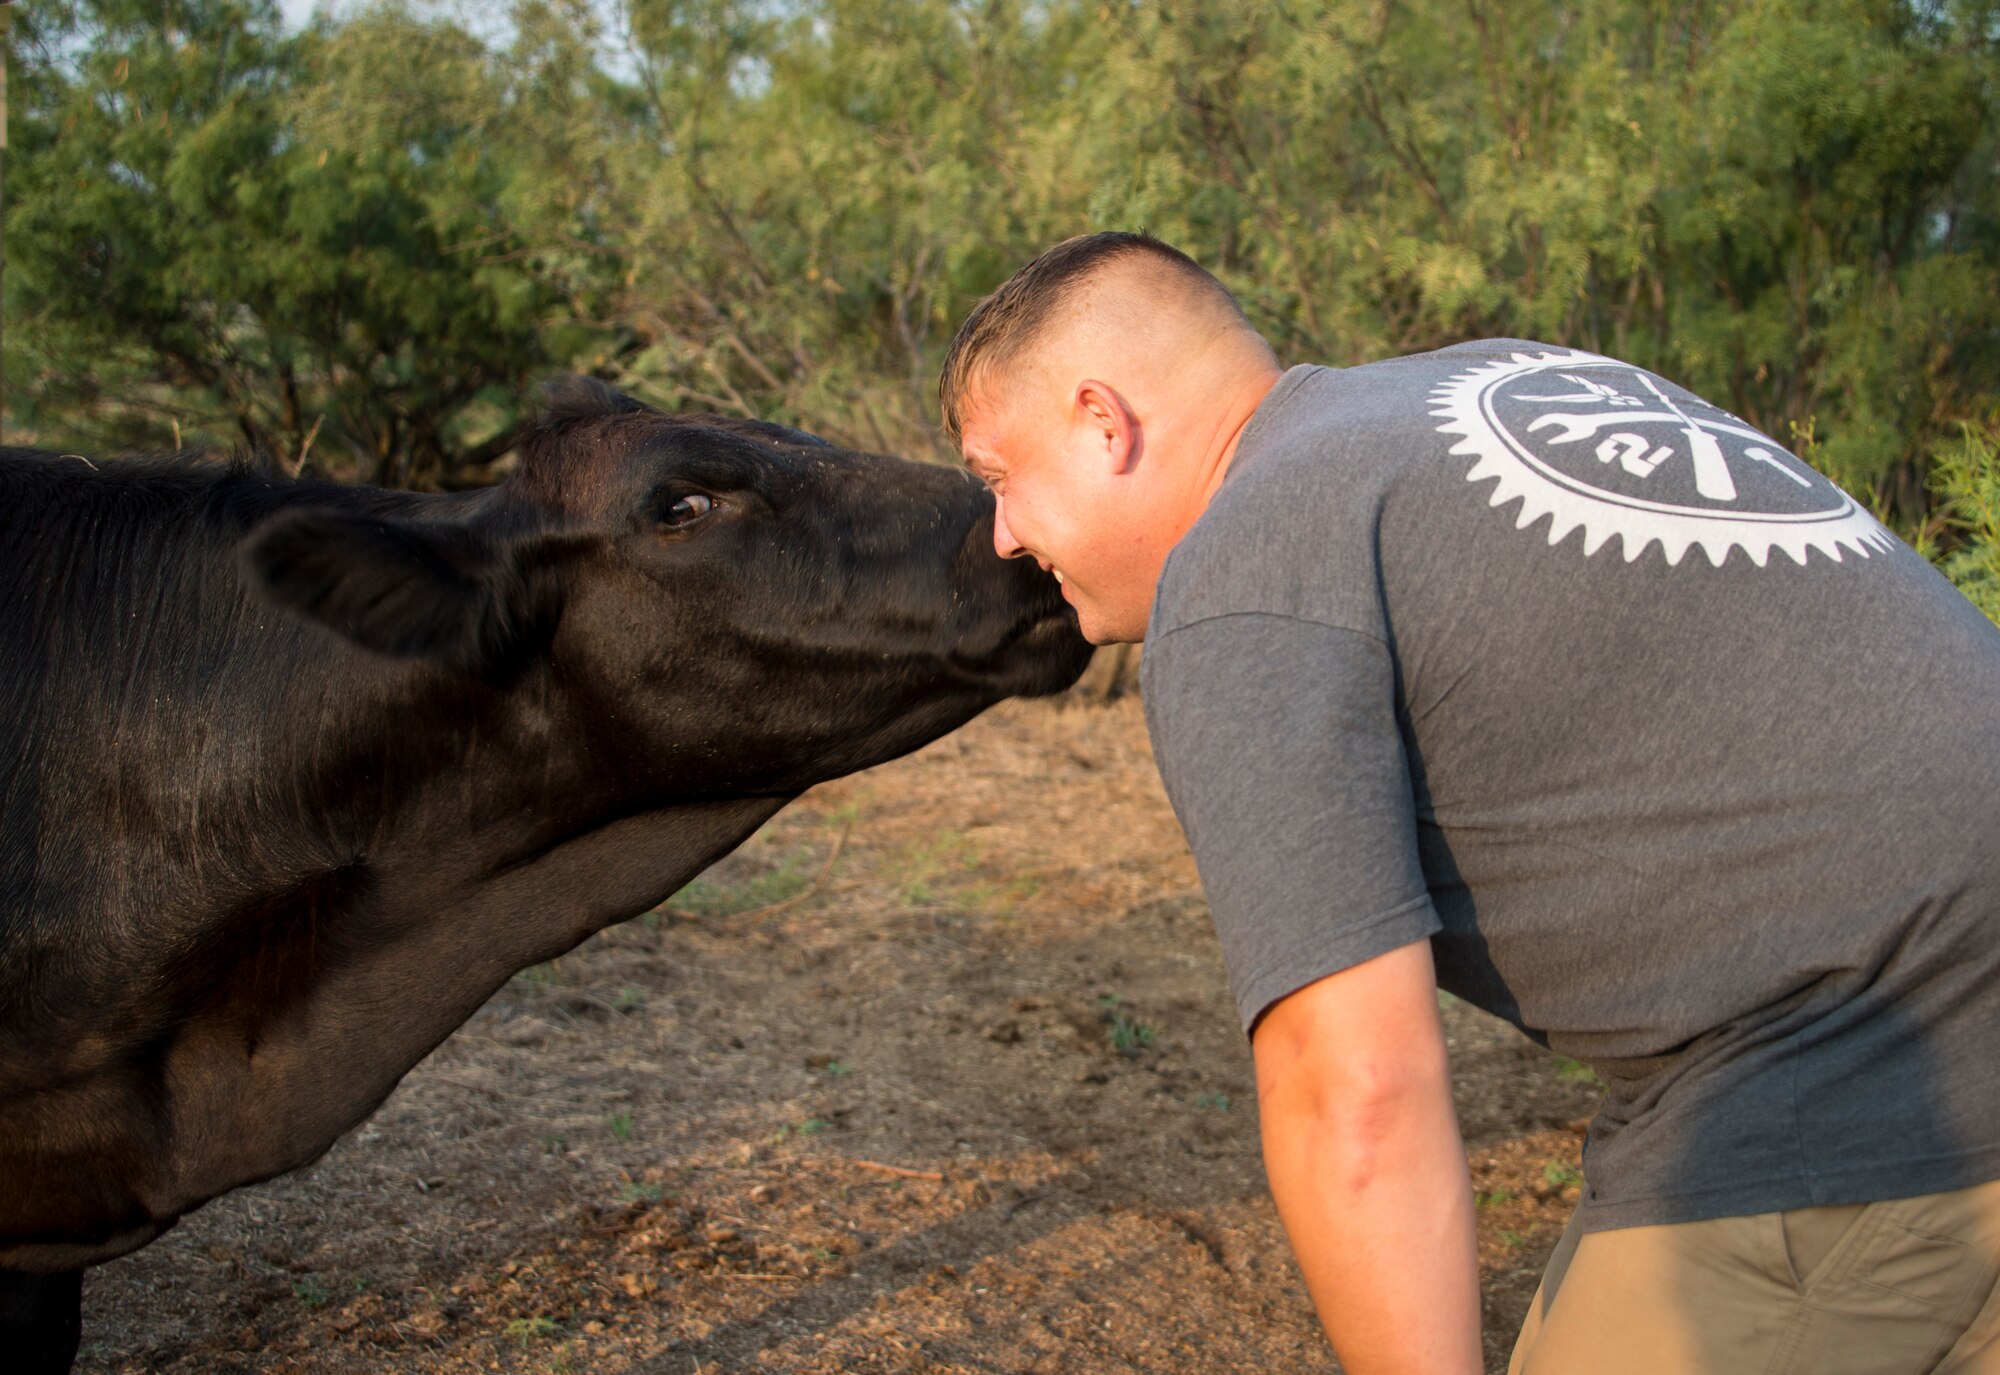 Milka the cow gives U.S. Air Force Master Sgt. Thomas Kessler, 97th Logistics Readiness Squadron Vehicle Management Flight superintendent, a kiss on 1AB Ranch in Altus, Oklahoma, Aug. 5, 2021. Kessler was born in Alzey, Germany and joined the military in July of 2000. (U.S. Air Force photo by Senior Airman Amanda Lovelace)